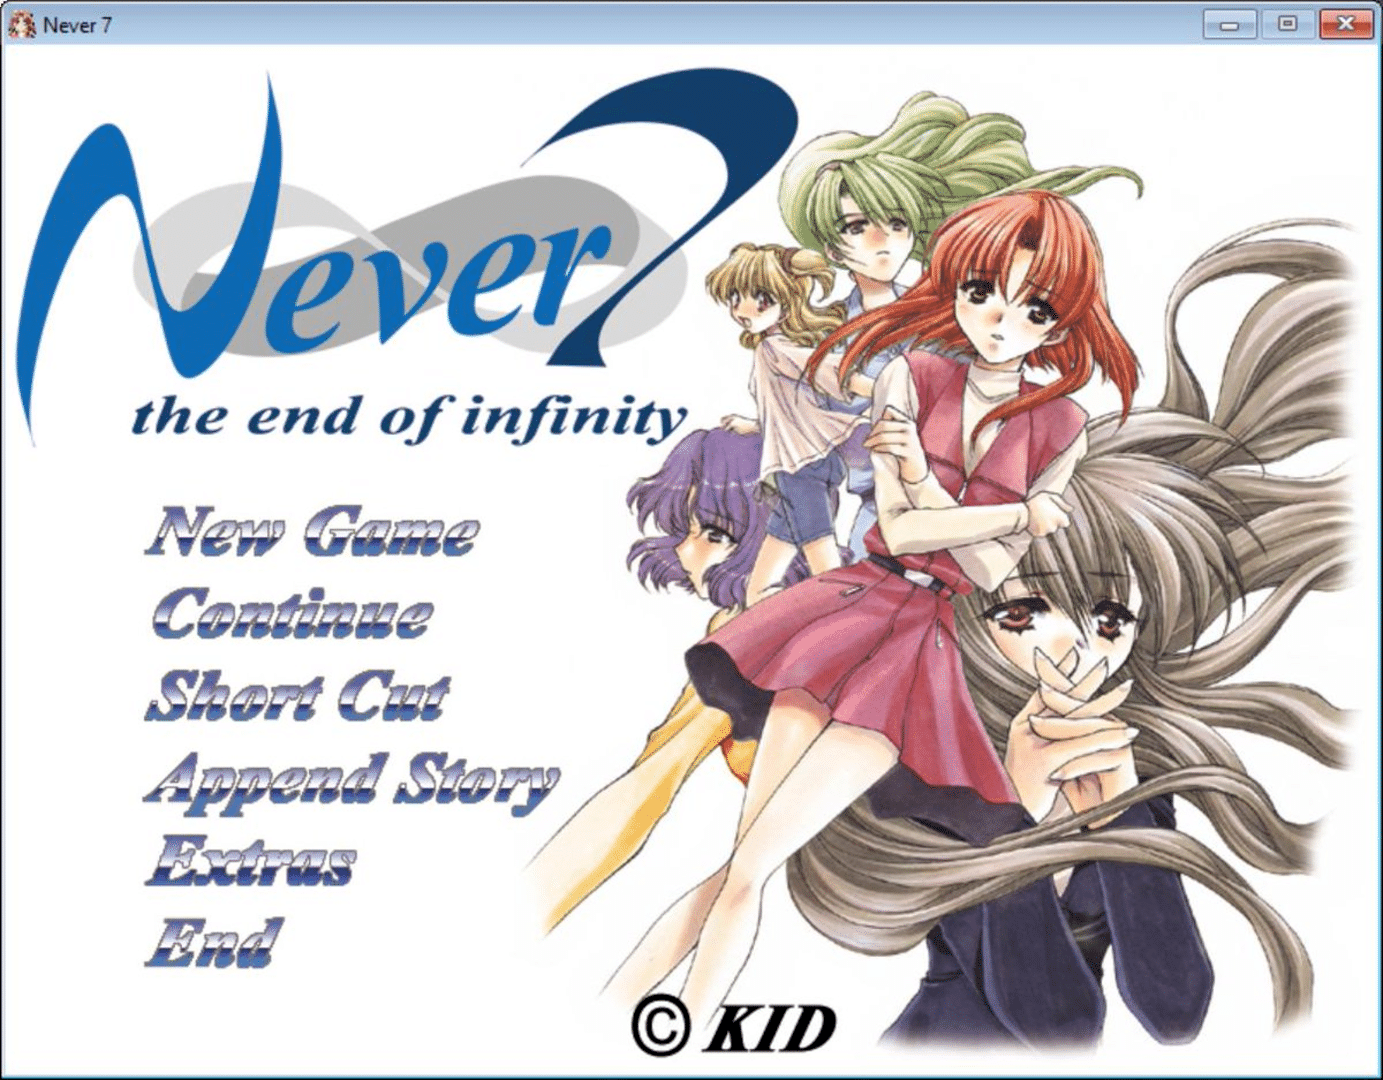 Never 7: The End of Infinity (2000)